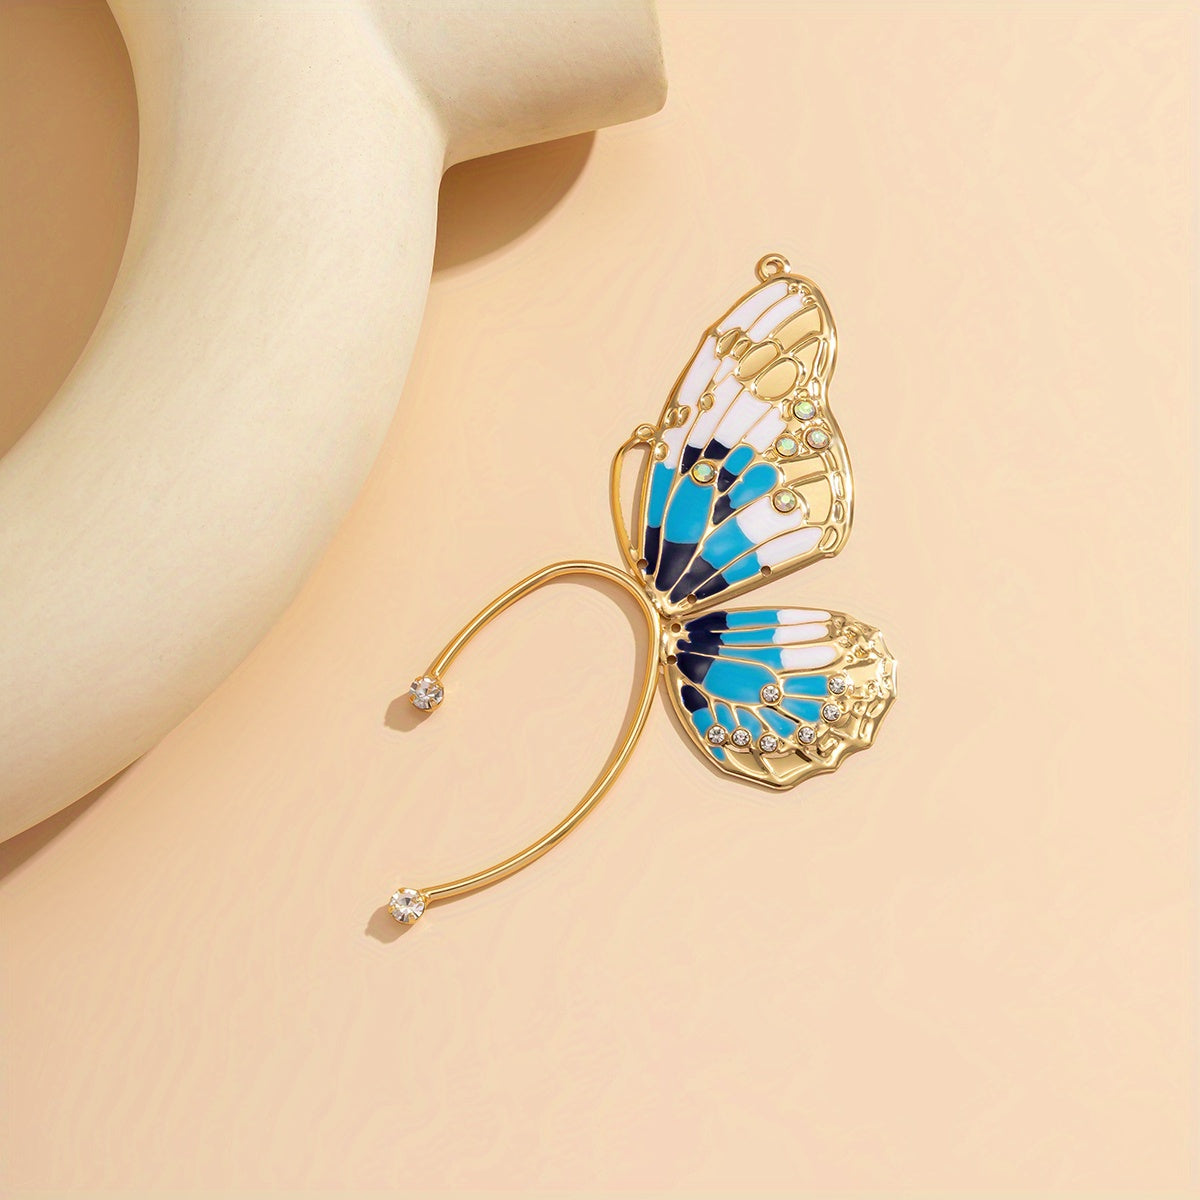 Gorgeous Big Butterfly Wing Ear Wrap with Sparkling Rhinestones - Retro Cute Style Zinc Alloy Jewelry for the Stage